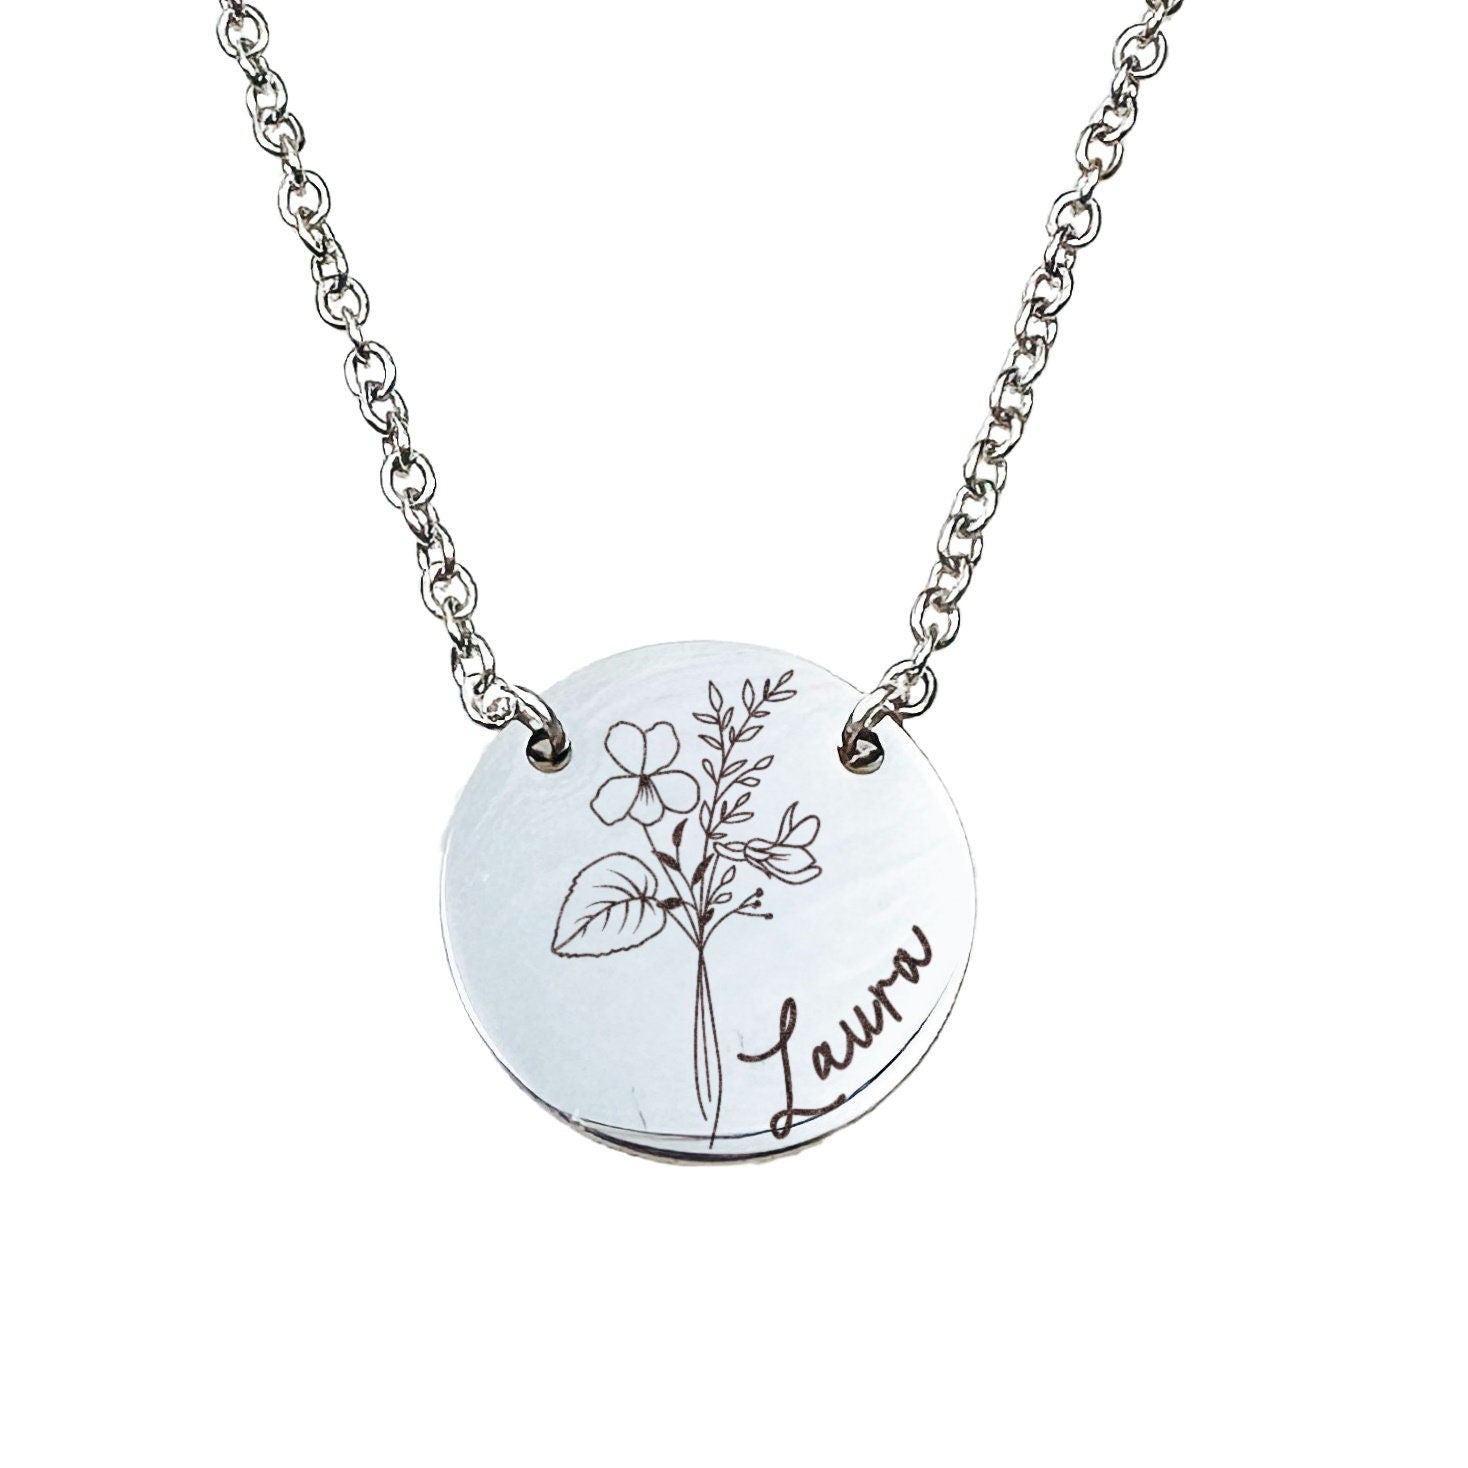 BIRTH FLOWER + NAME NECKLACE